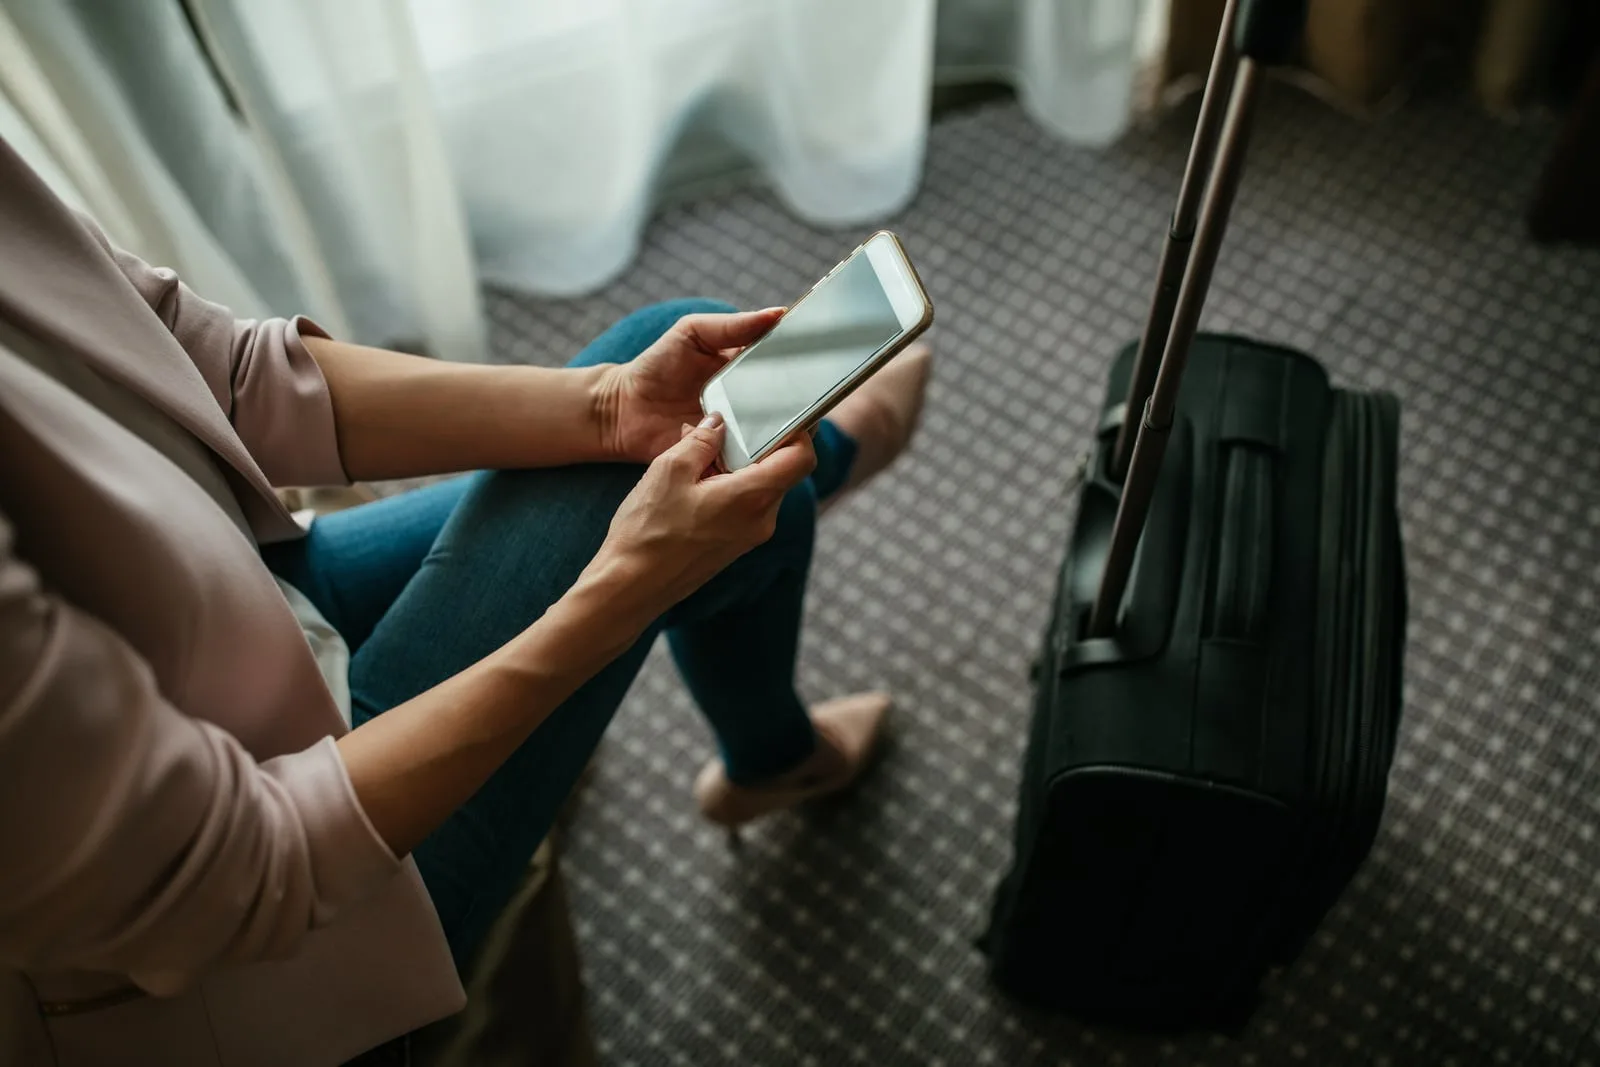 a woman with a suitcase uses a cell phone